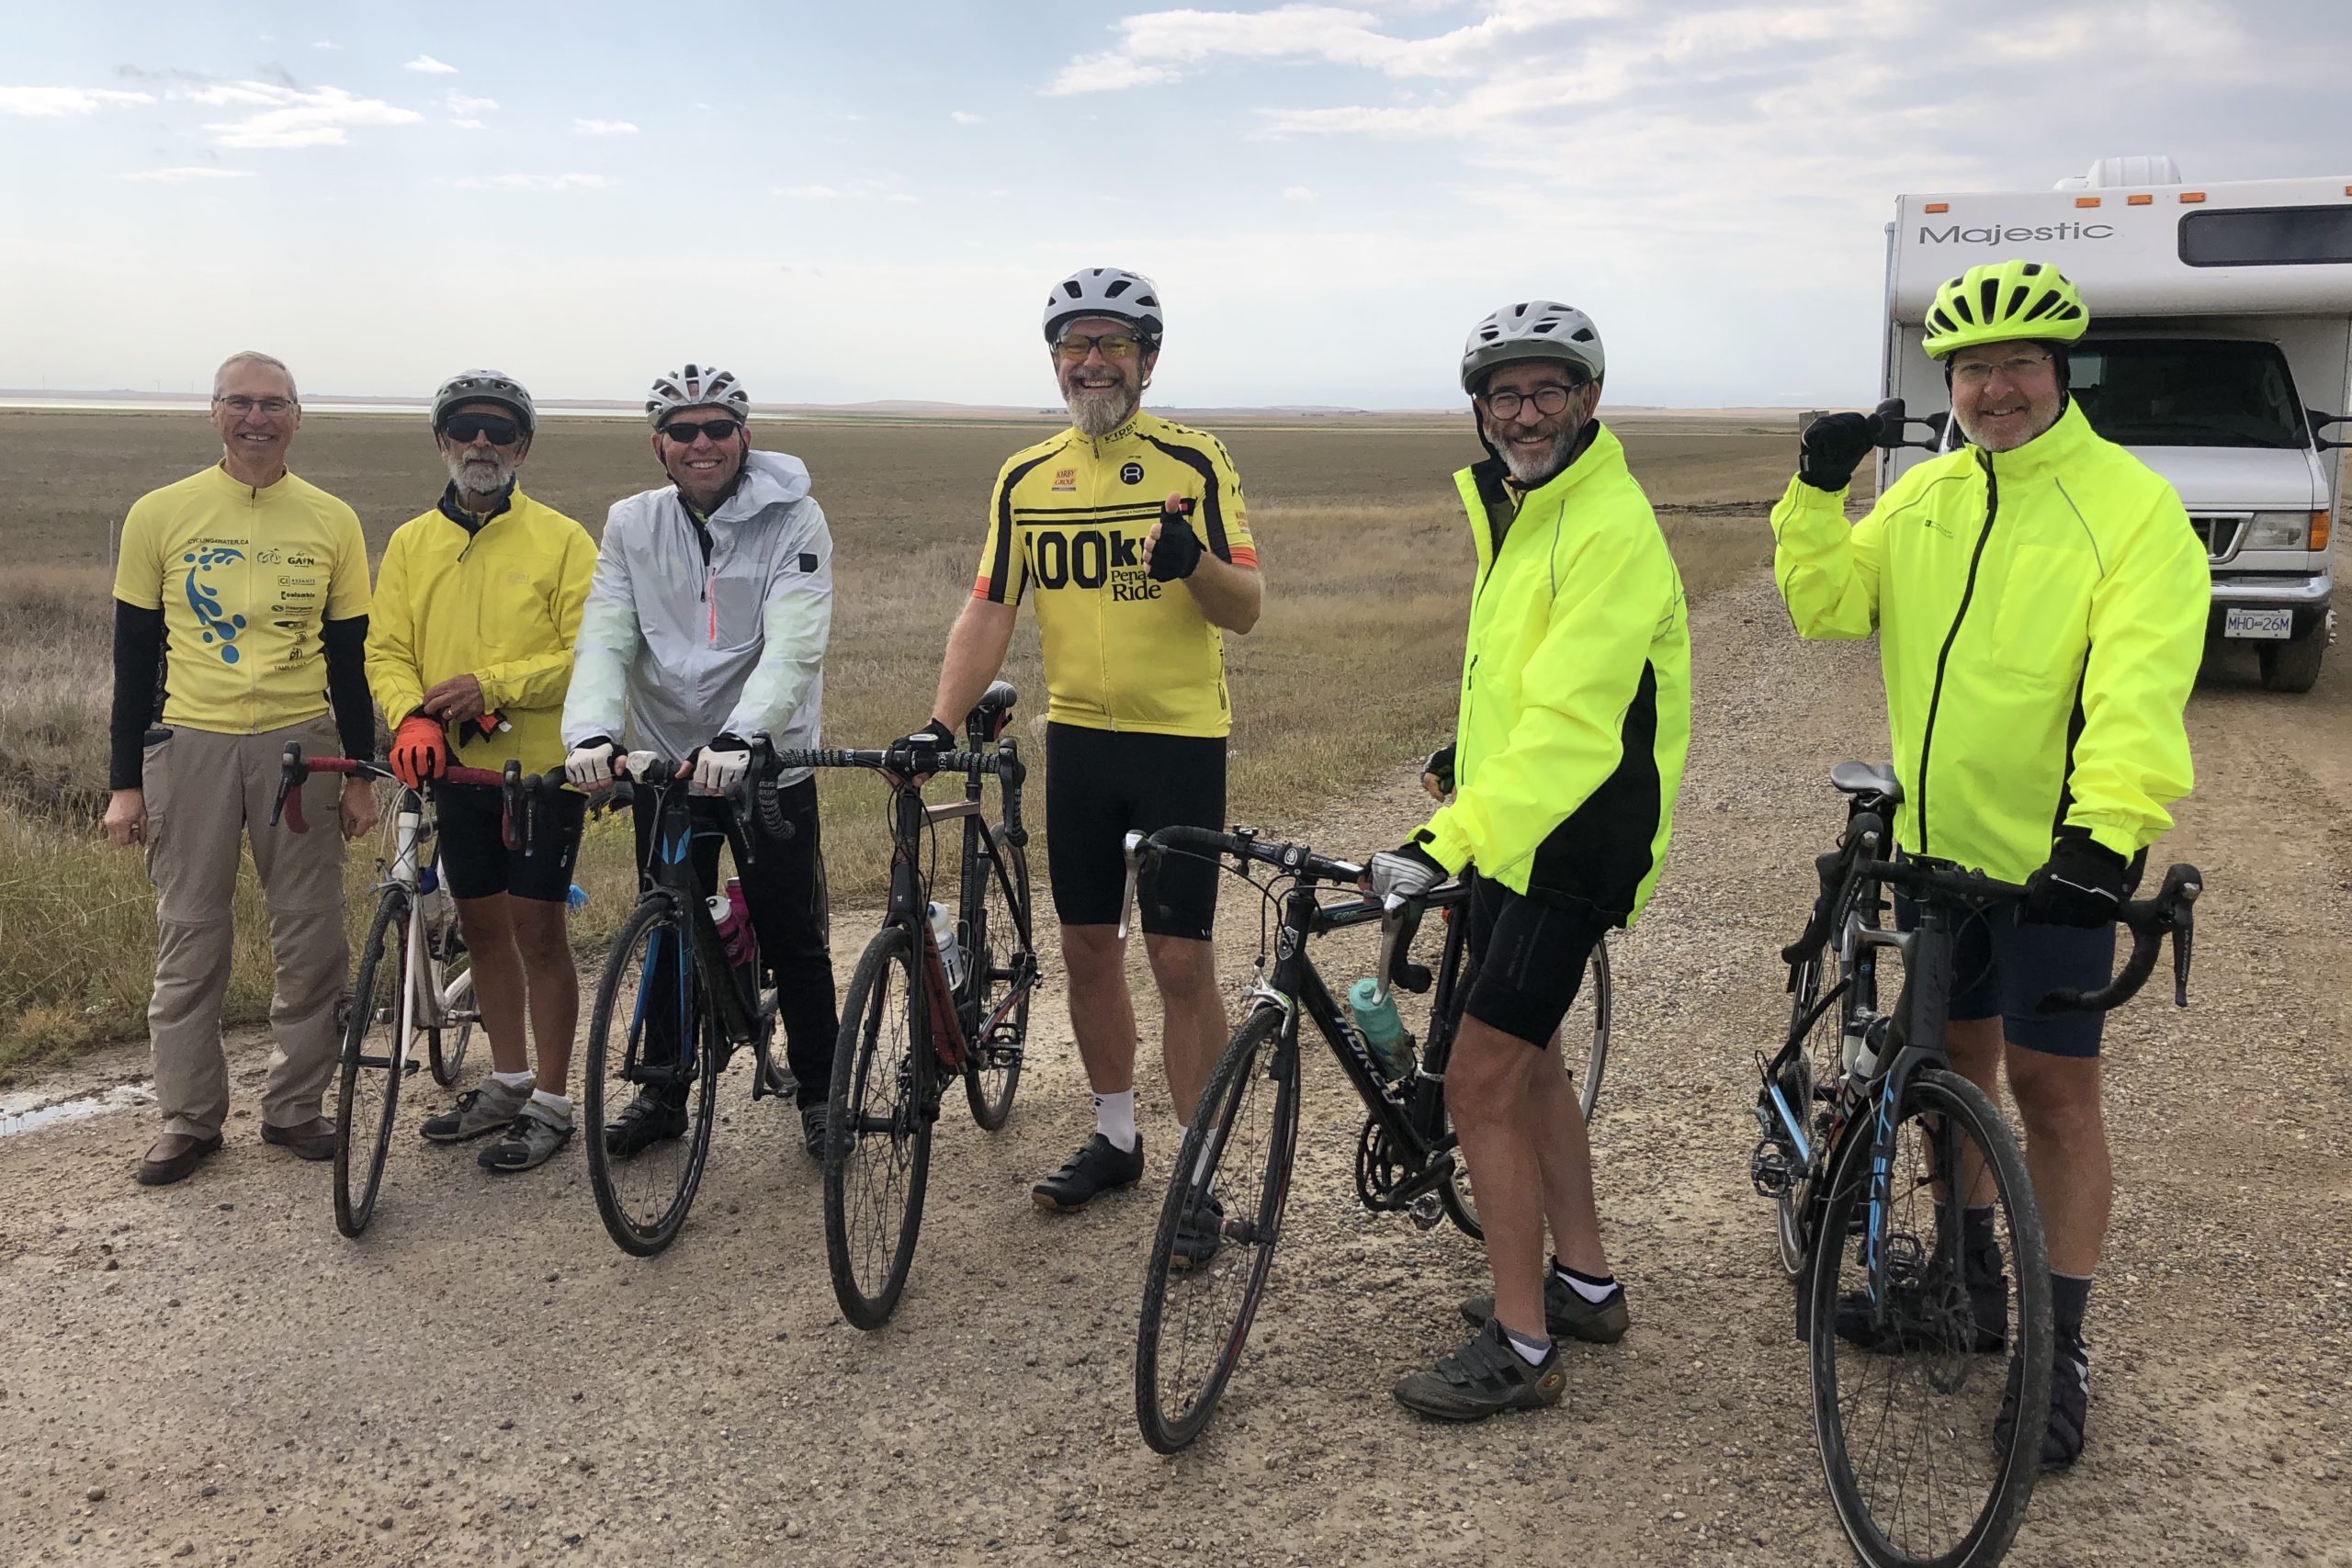 Day 29: Swift Current to Moose Jaw – 158 KM